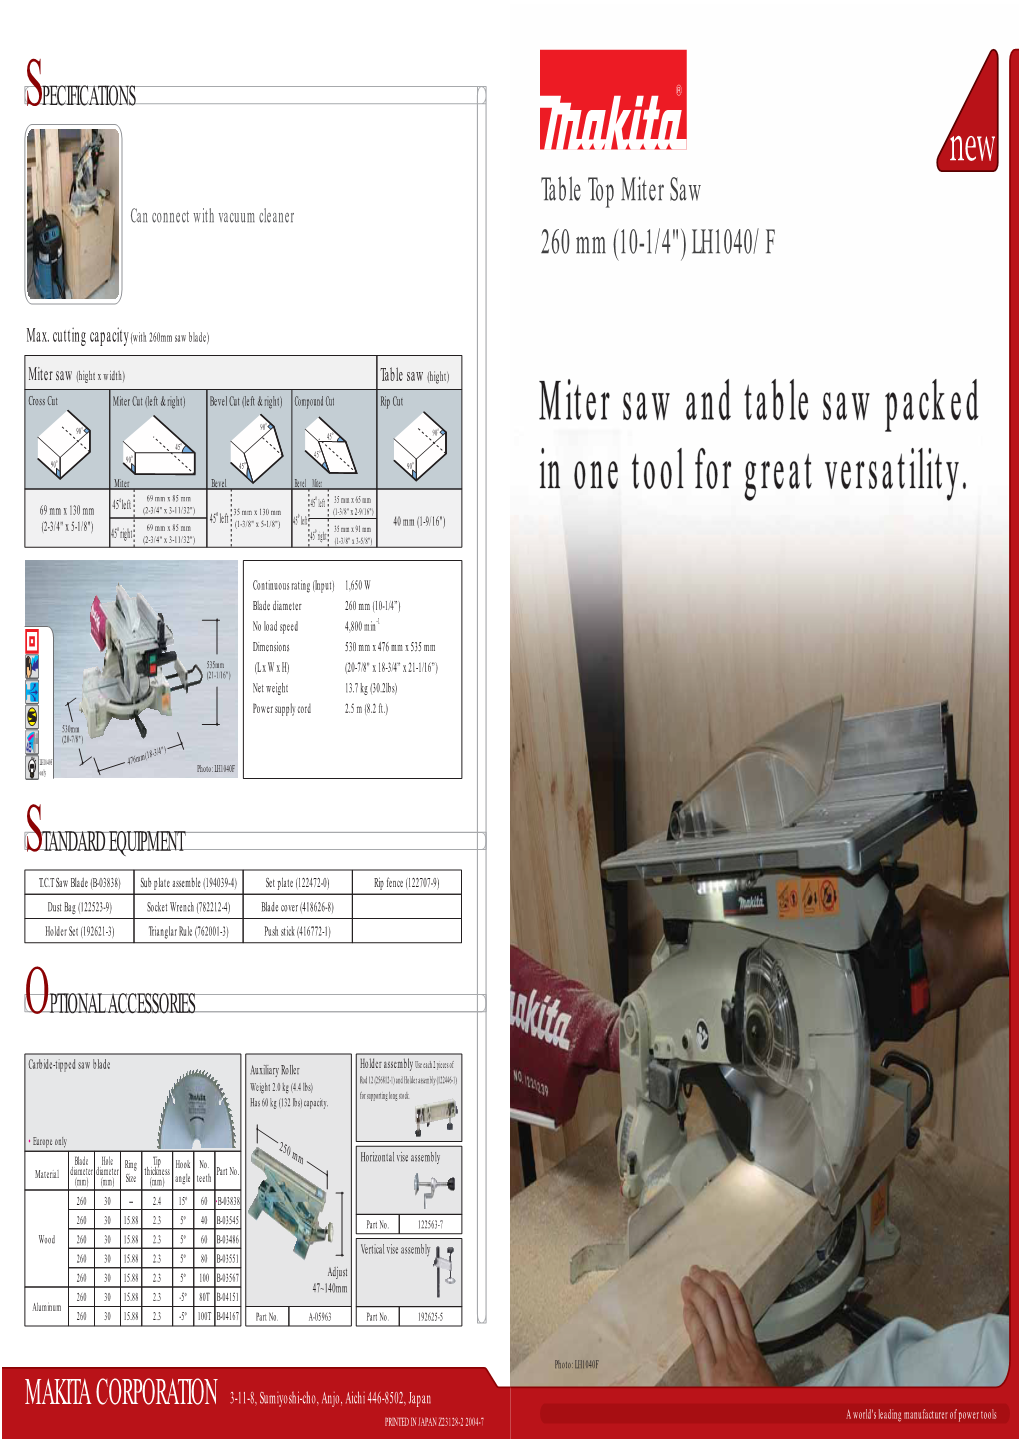 Miter Saw and Table Saw Packed in One Tool for Great Versatility. Miter